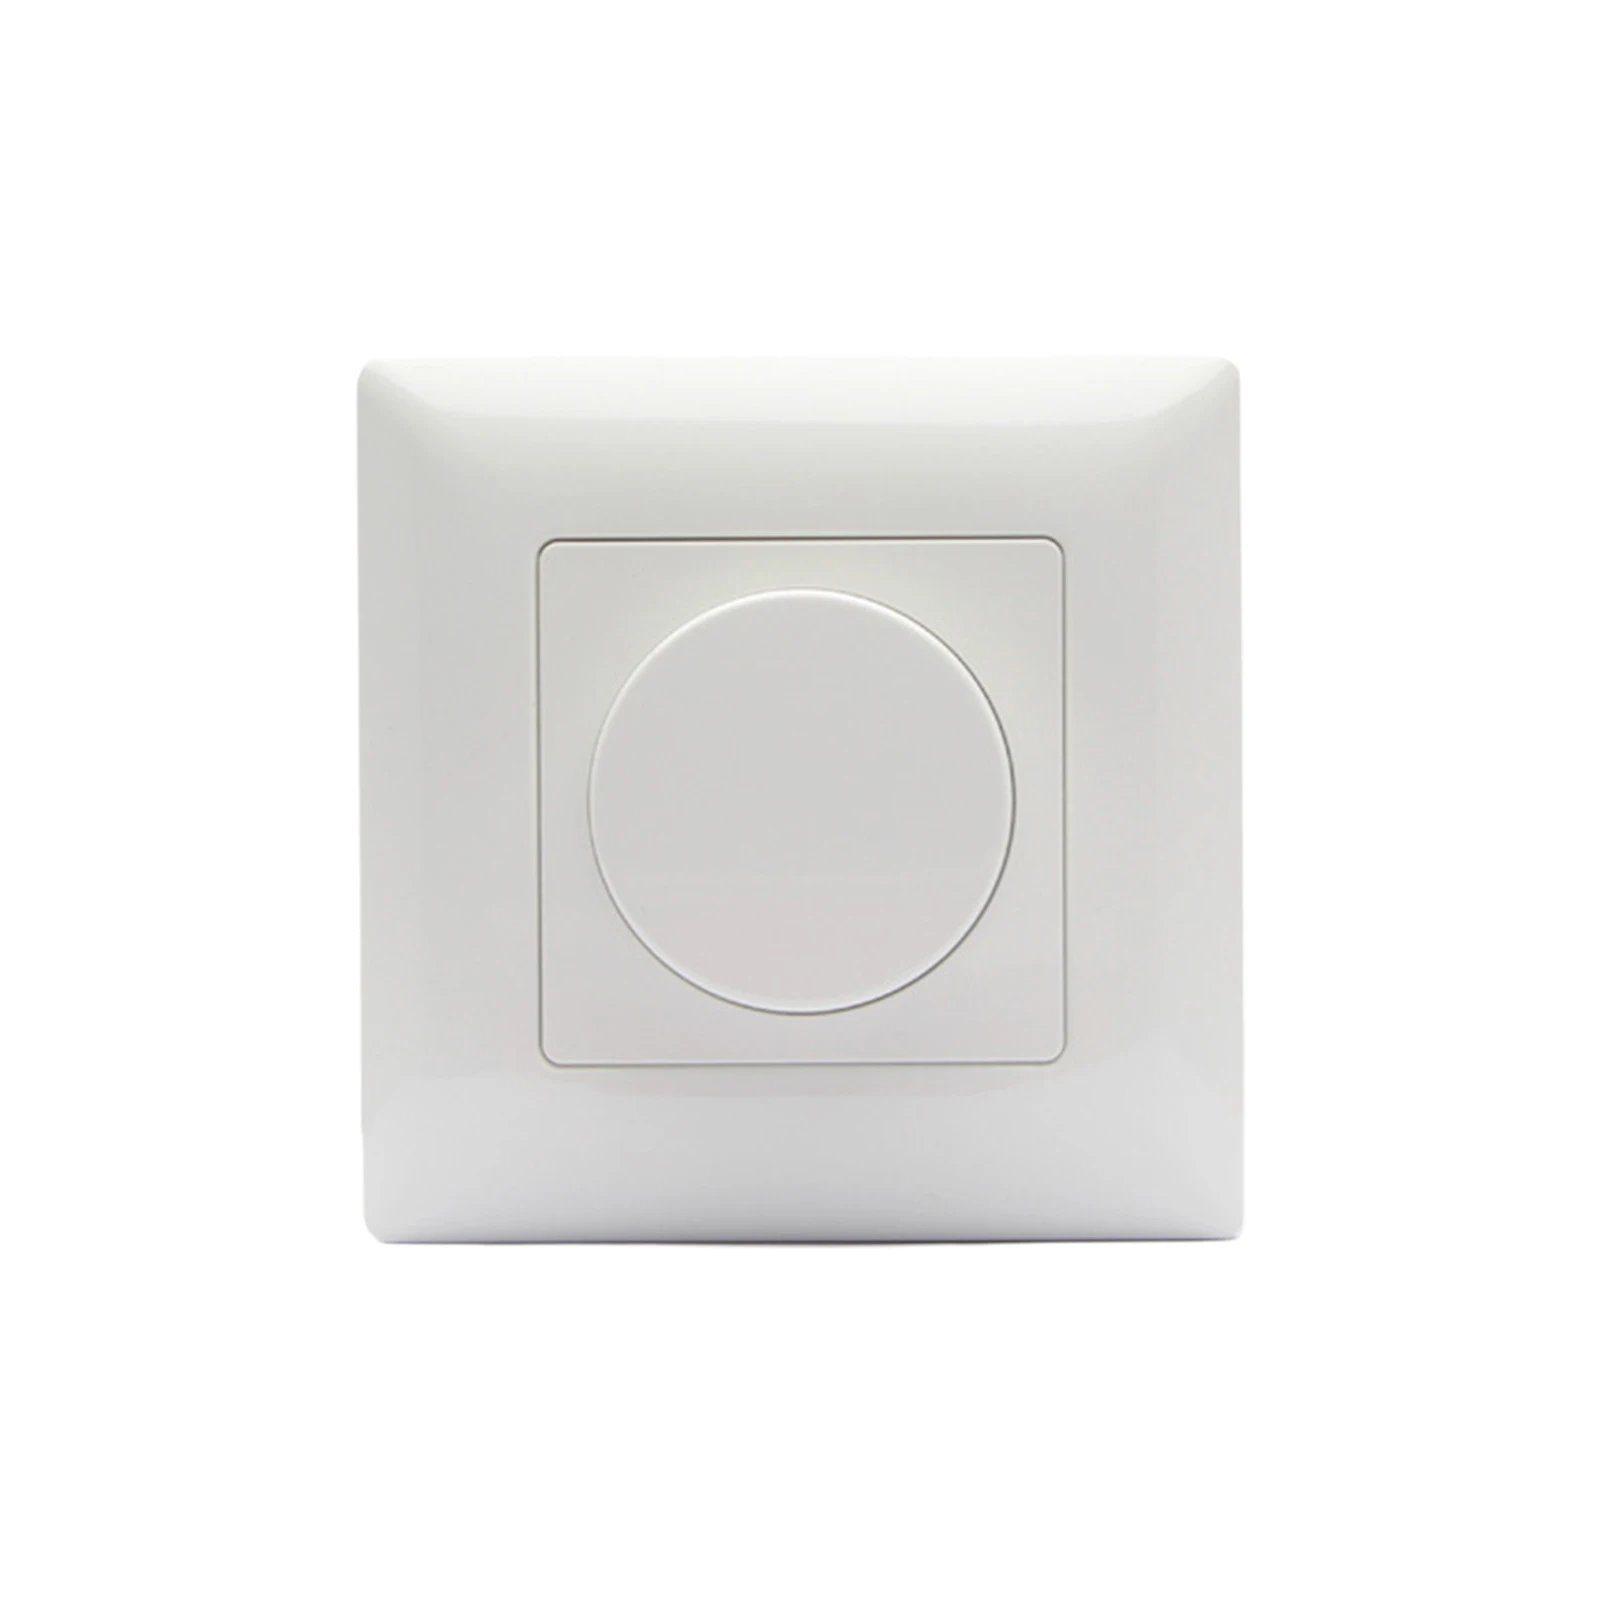 

Dimmer Switch No Flicker Decorative Plastic 1 Gang For LED Light Smooth Home Office Replacement Wall Mounted Rotary Knob Quiet